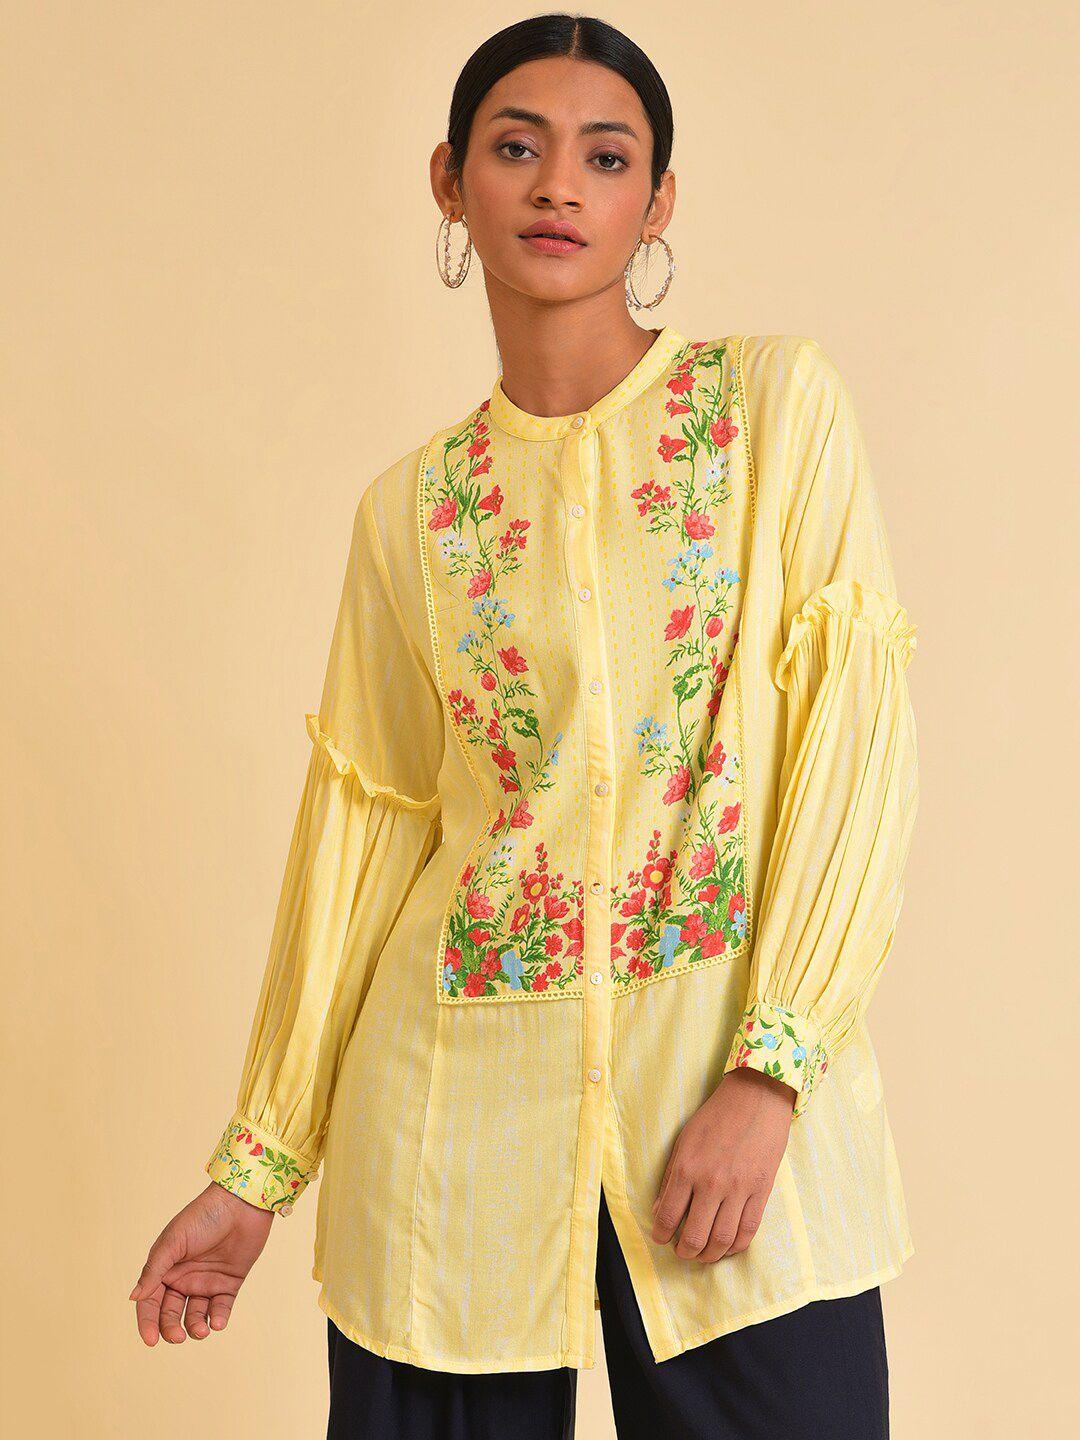 w-yellow-&-red-floral-printed-mandarin-collar-shirt-style-longline-top